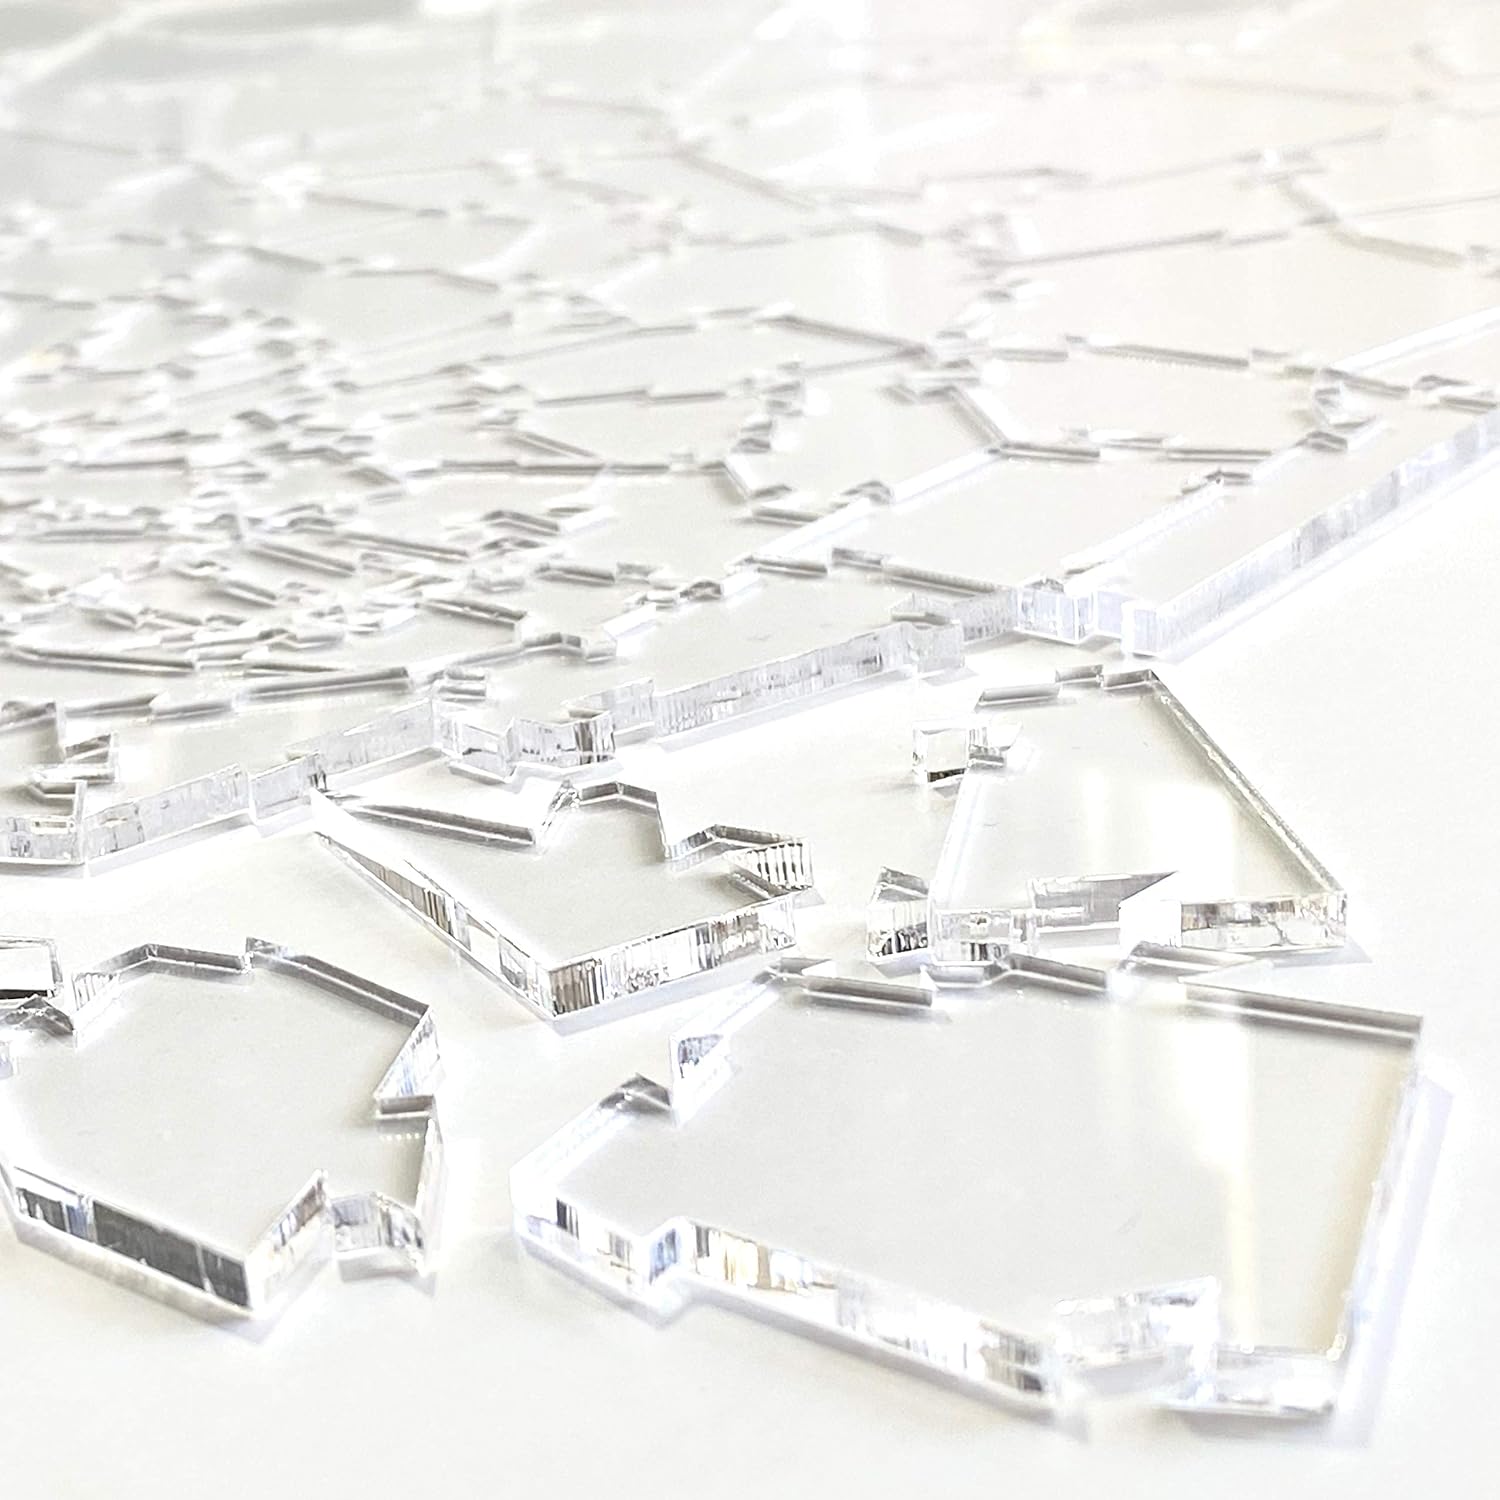 Broken Glass Jigsaw Puzzle - Unique Clear Impossible Puzzle - Play With Your Brain